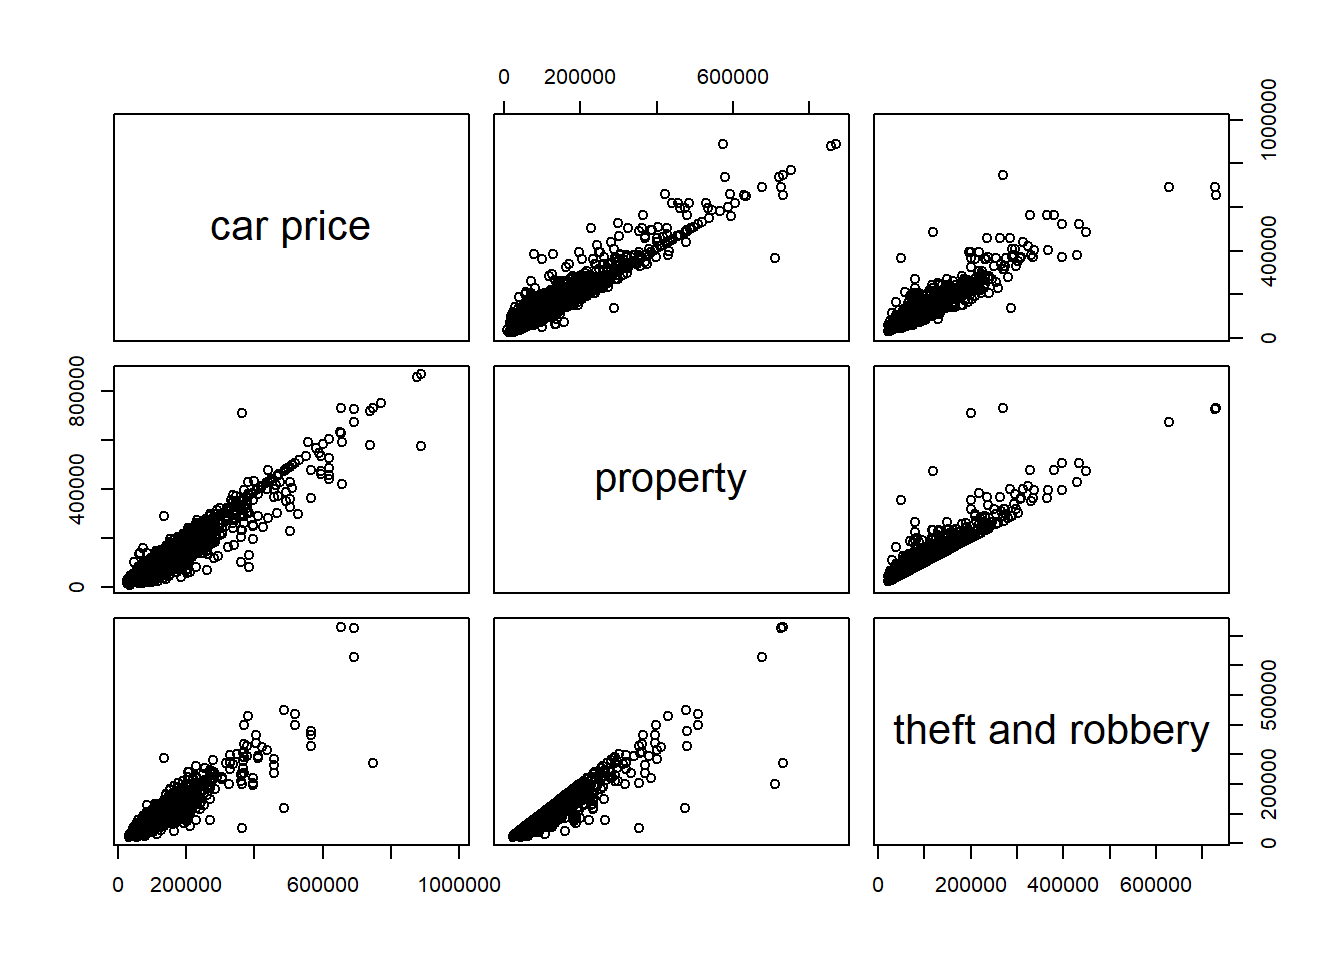 Pair plots of car price, aoi of property, and aoi of theft and robbery.